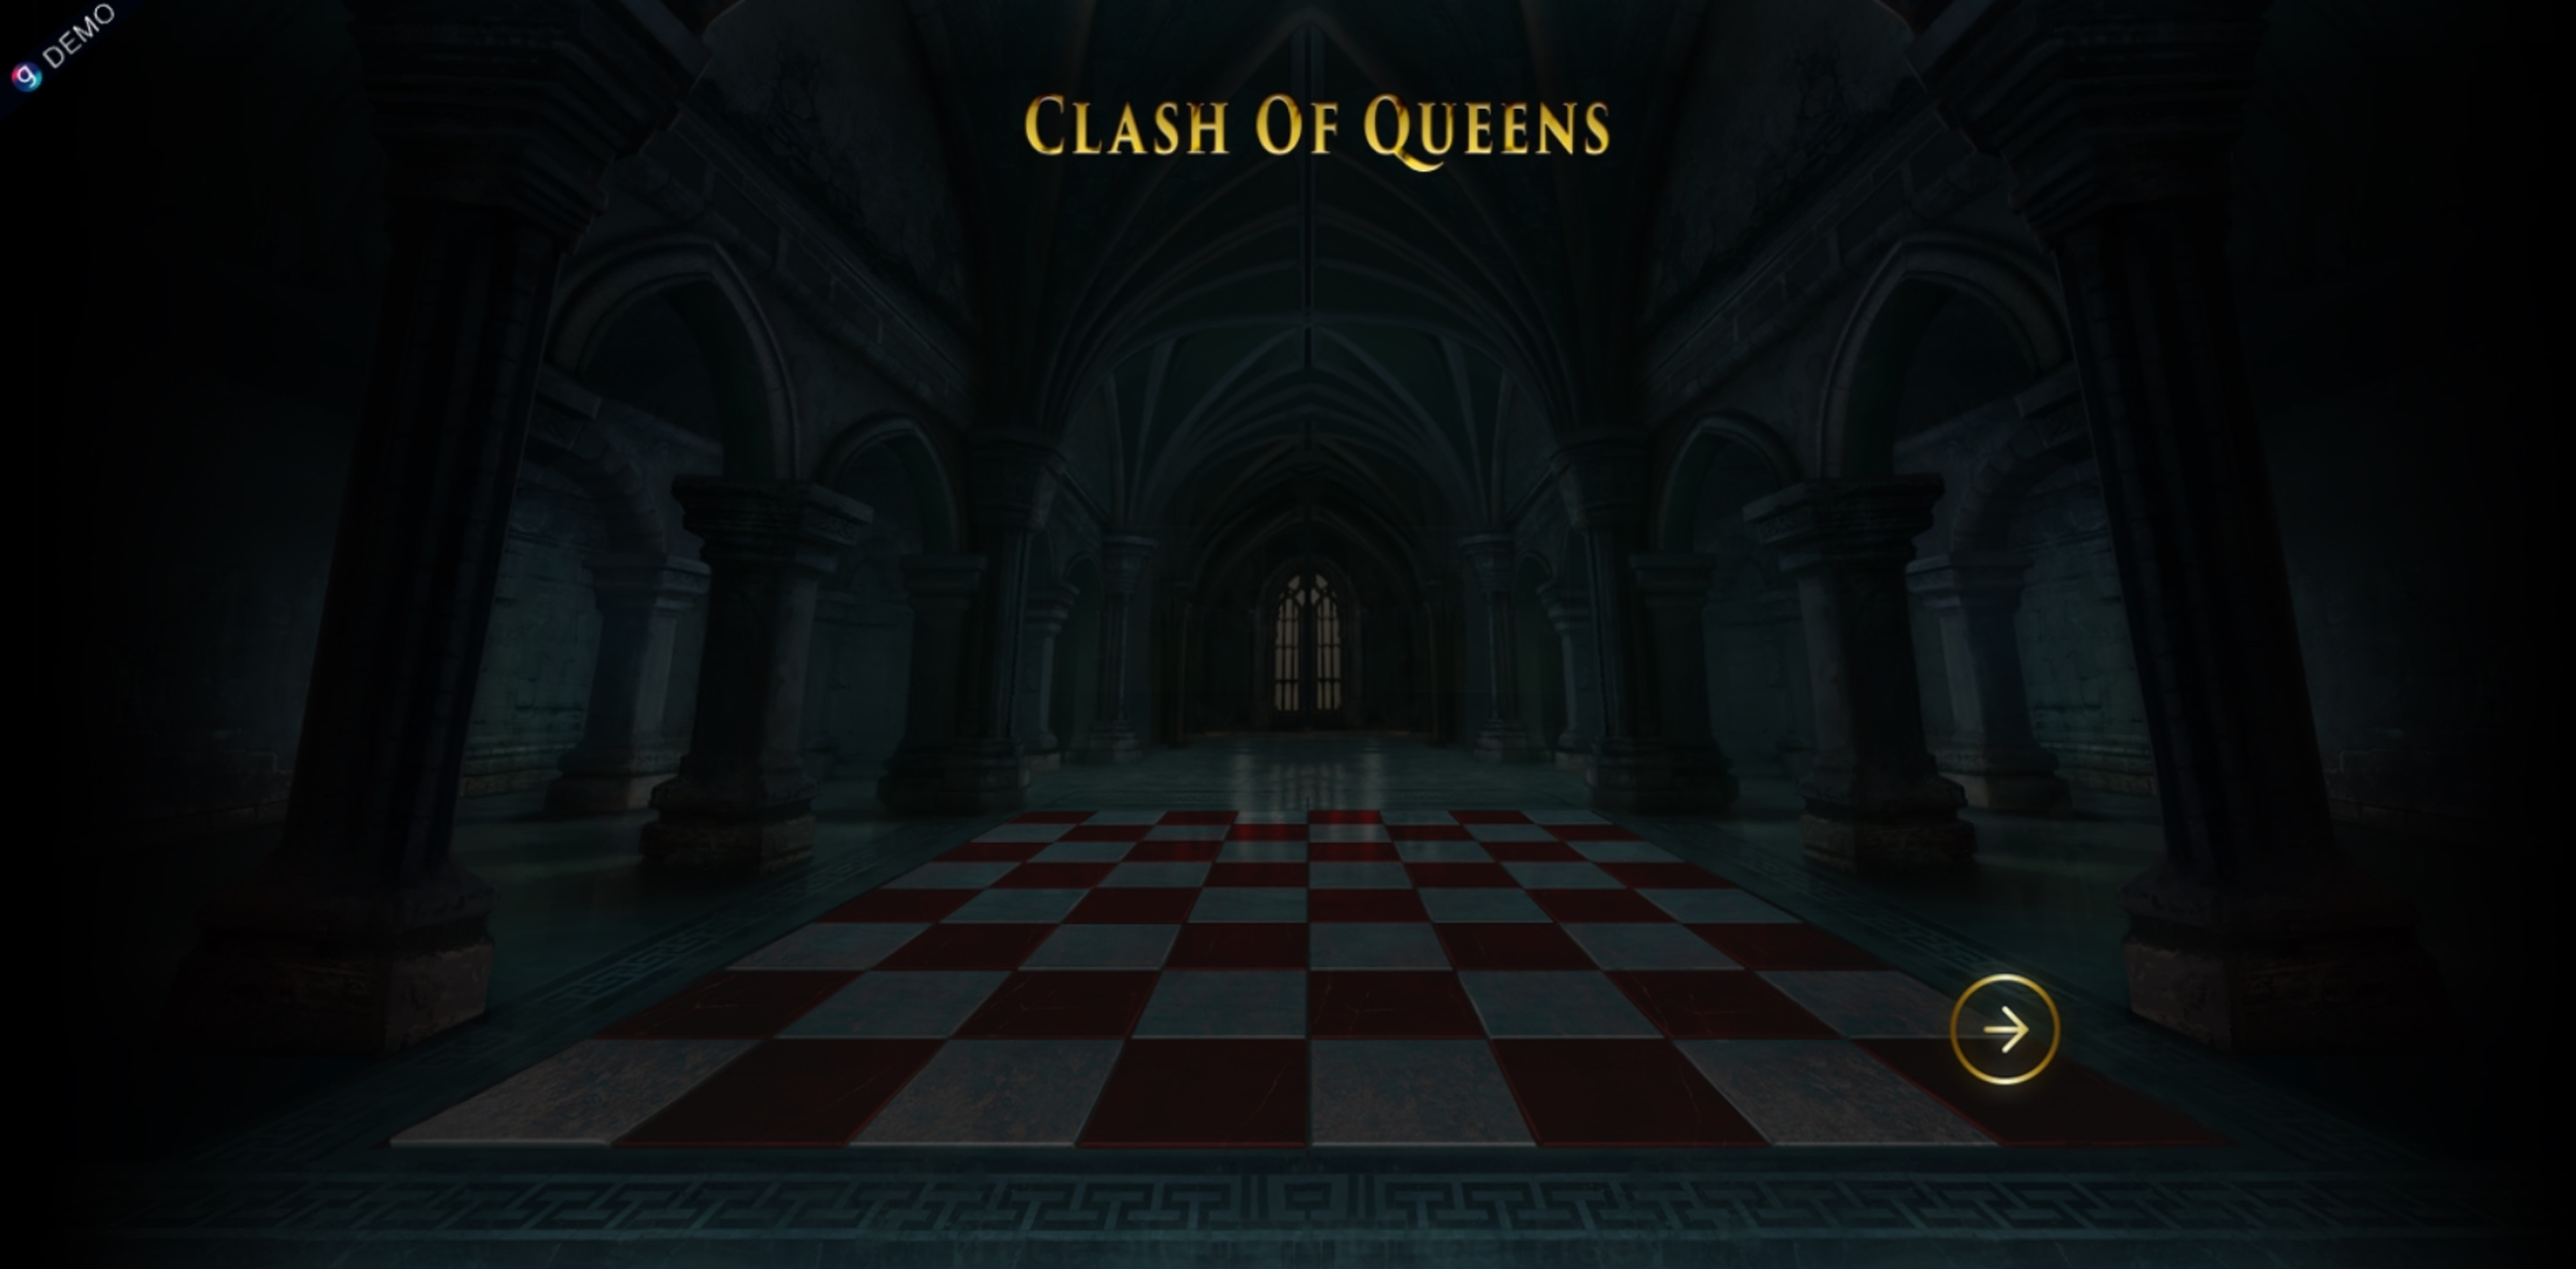 Play Clash of Queens Free Casino Slot Game by Genesis Gaming